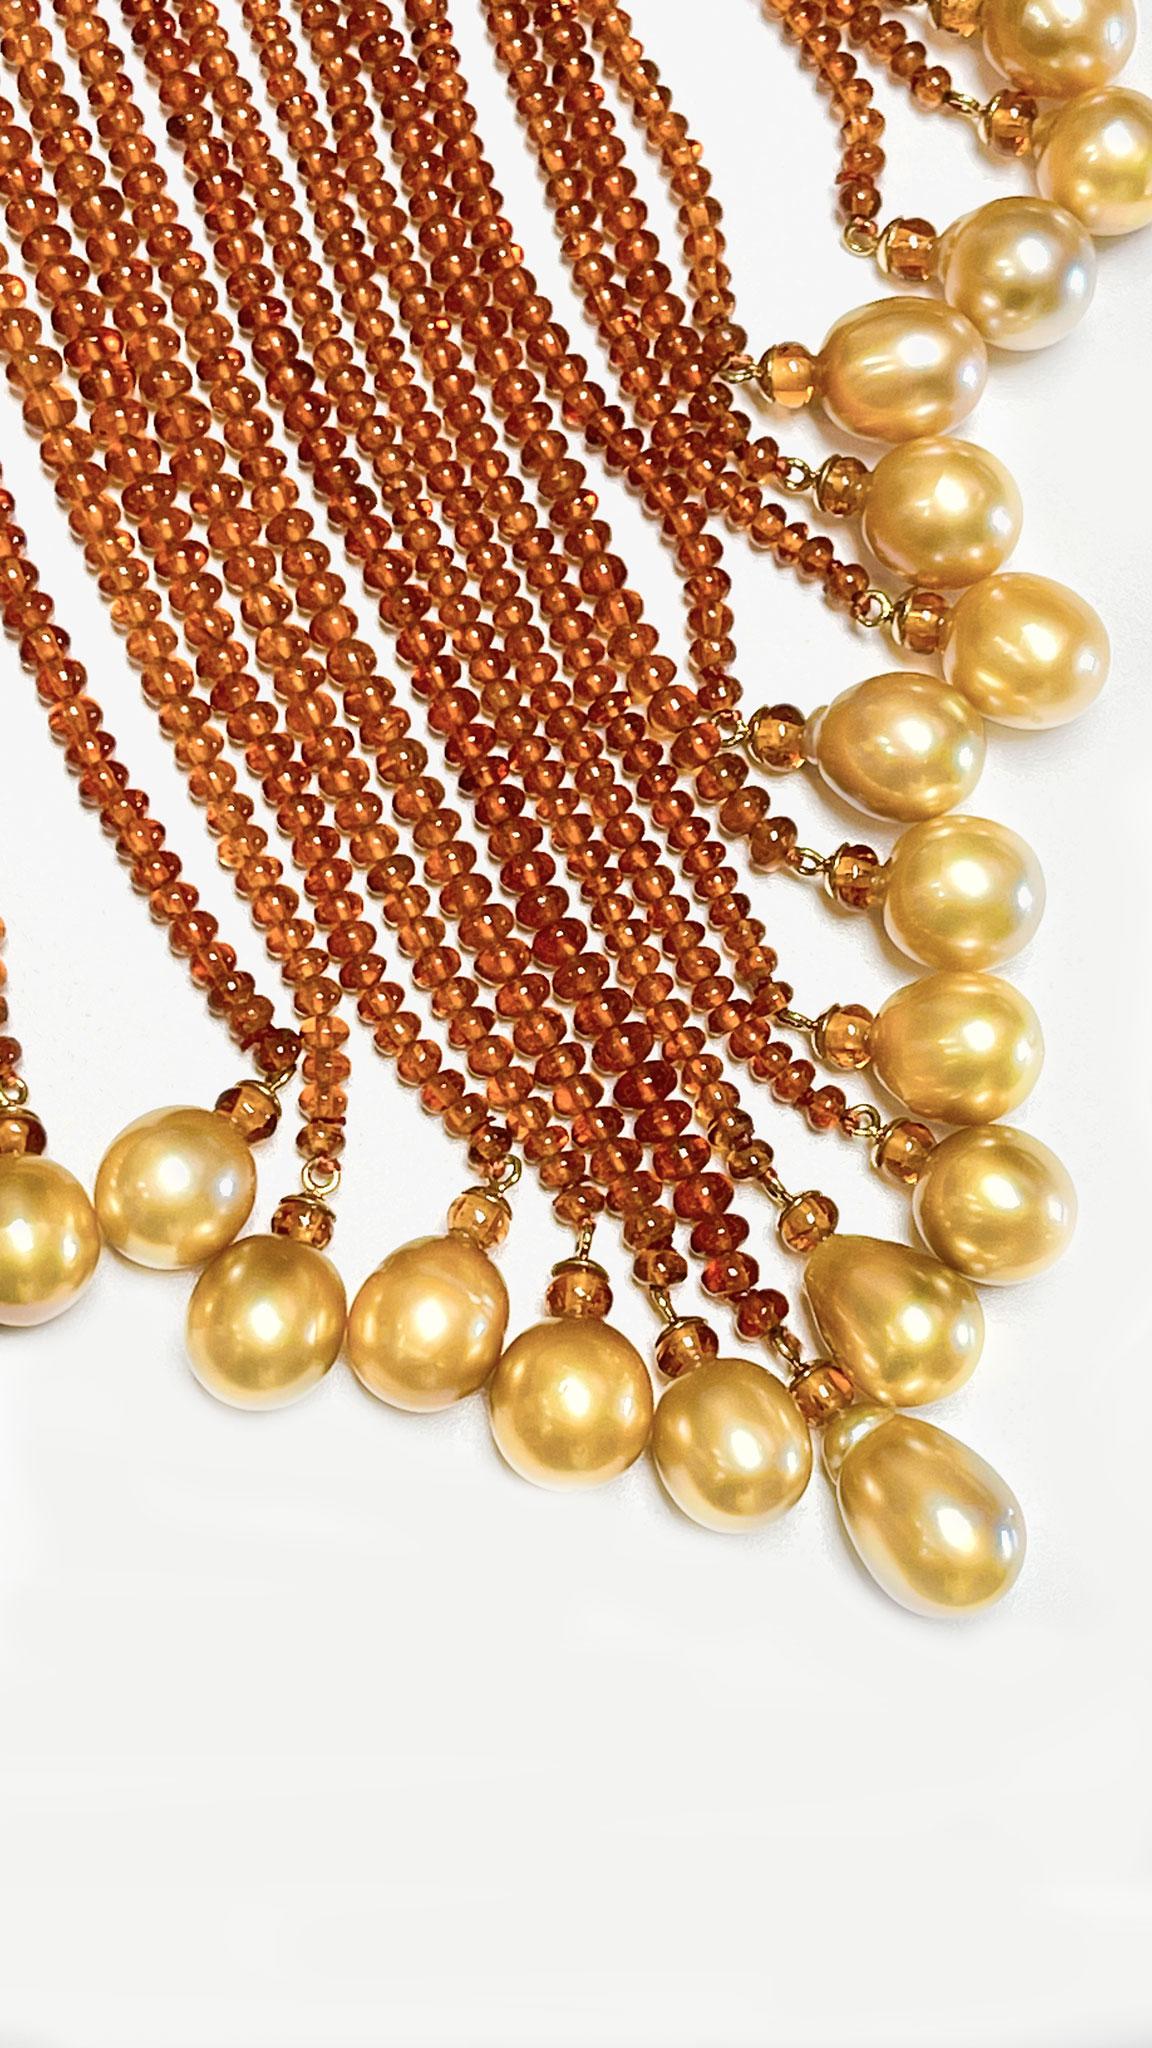 Mixed Cut South Sea Pearl Necklace Set with Citrine 18k Gold For Sale